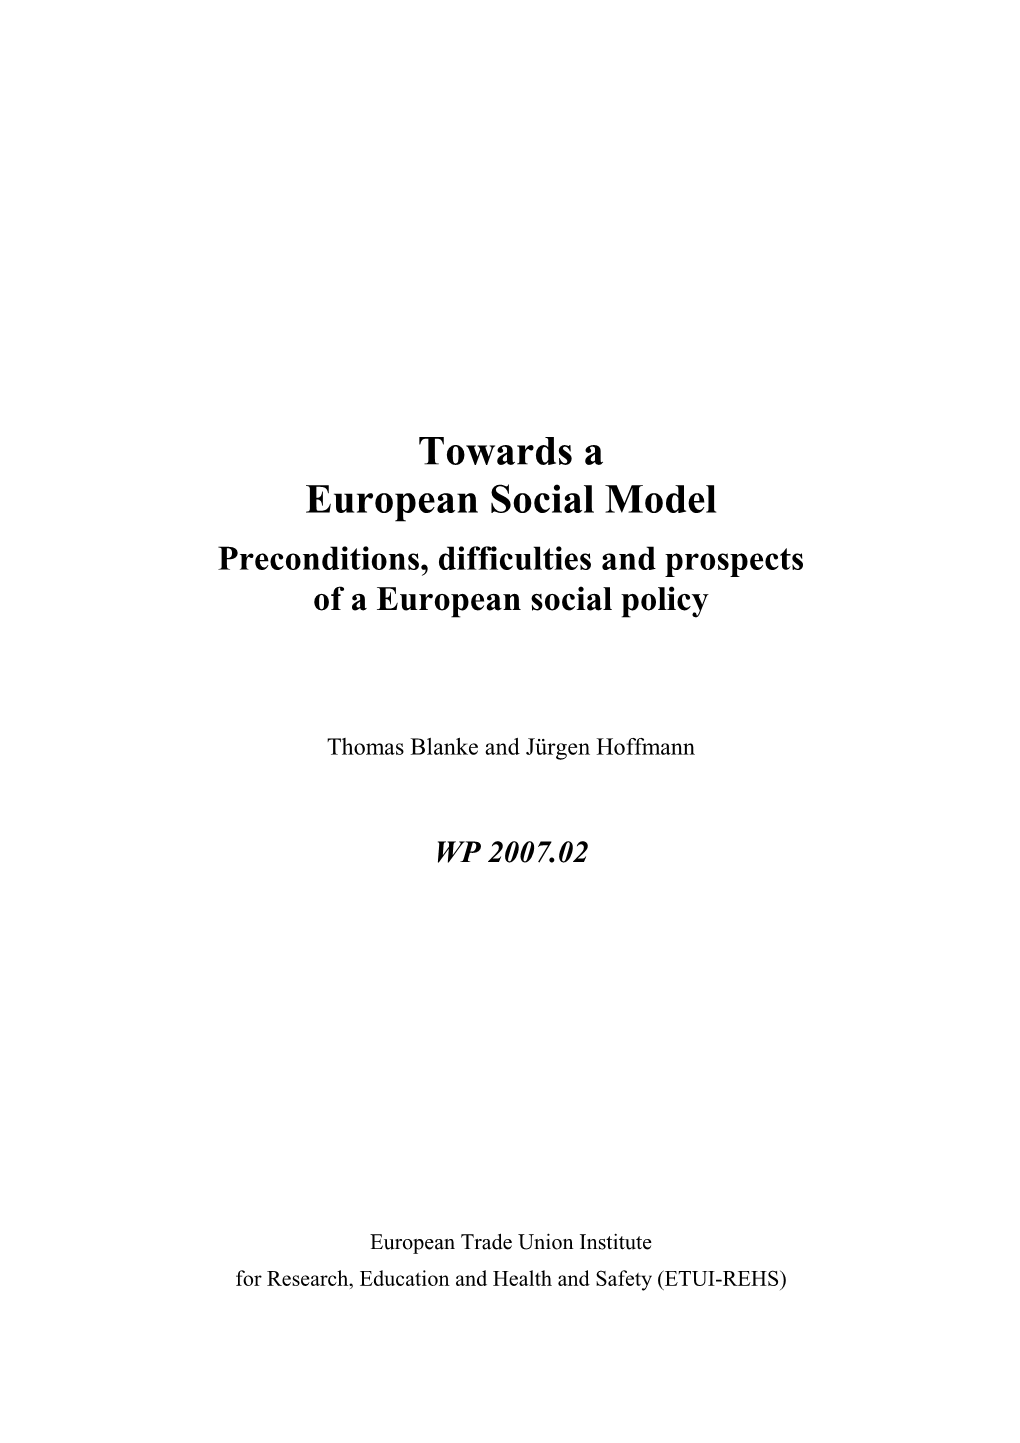 Towards a European Social Model Preconditions, Difficulties and Prospects of a European Social Policy